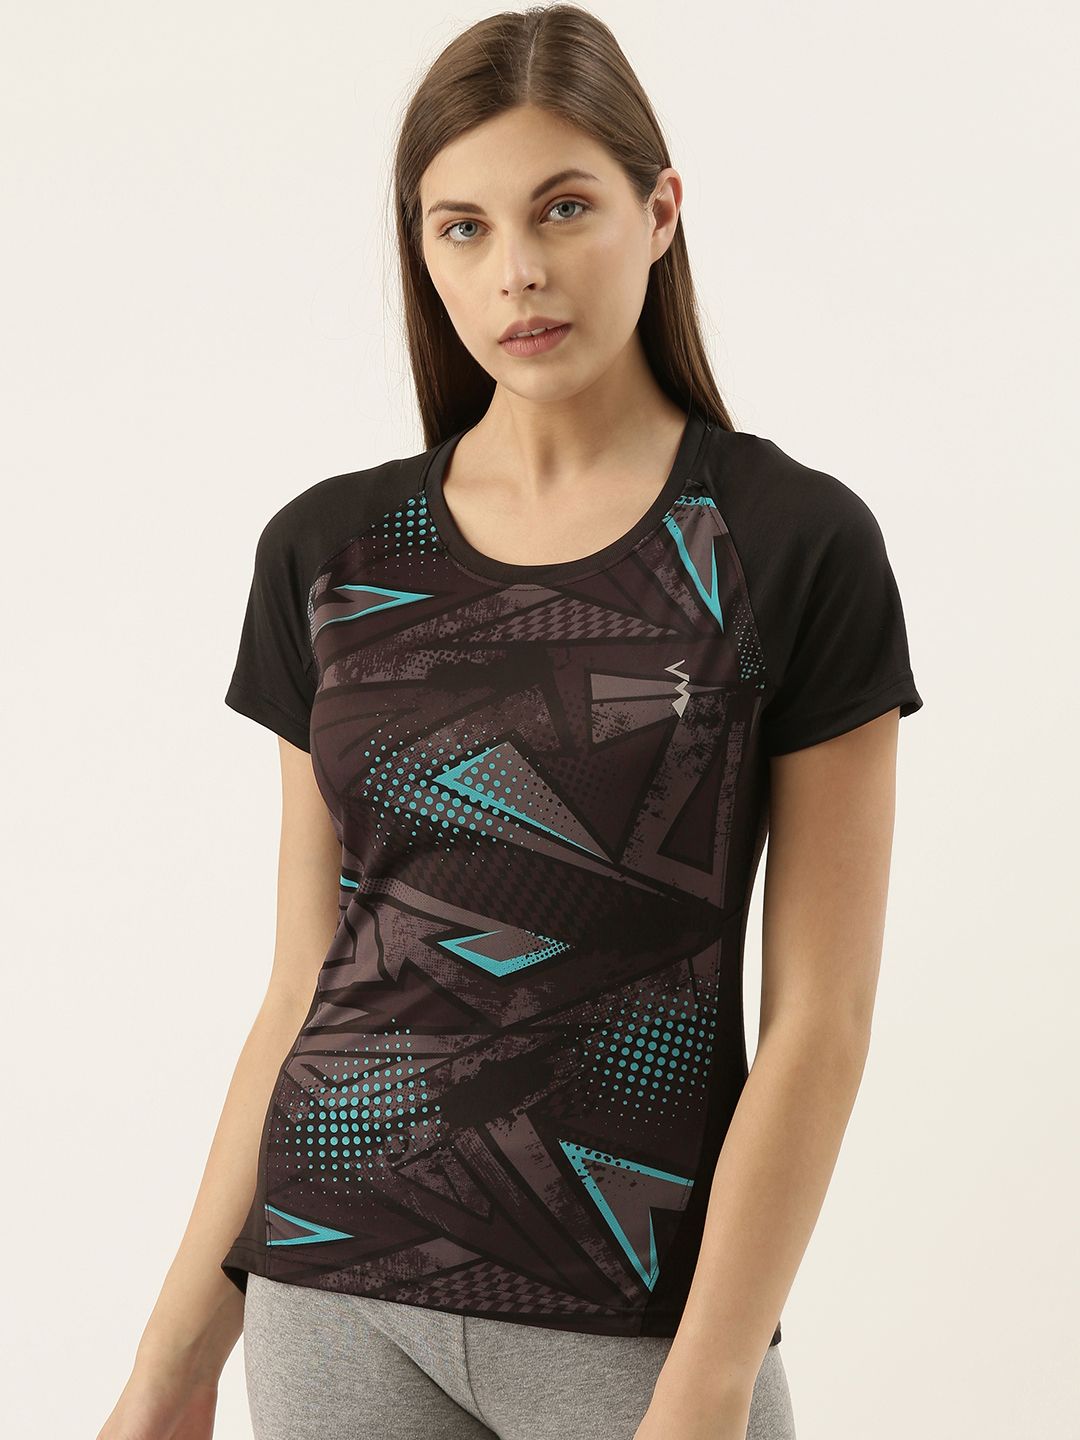 Campus Sutra Women Black & Charcoal Grey Abstract Print Round Neck Running T-shirt Price in India